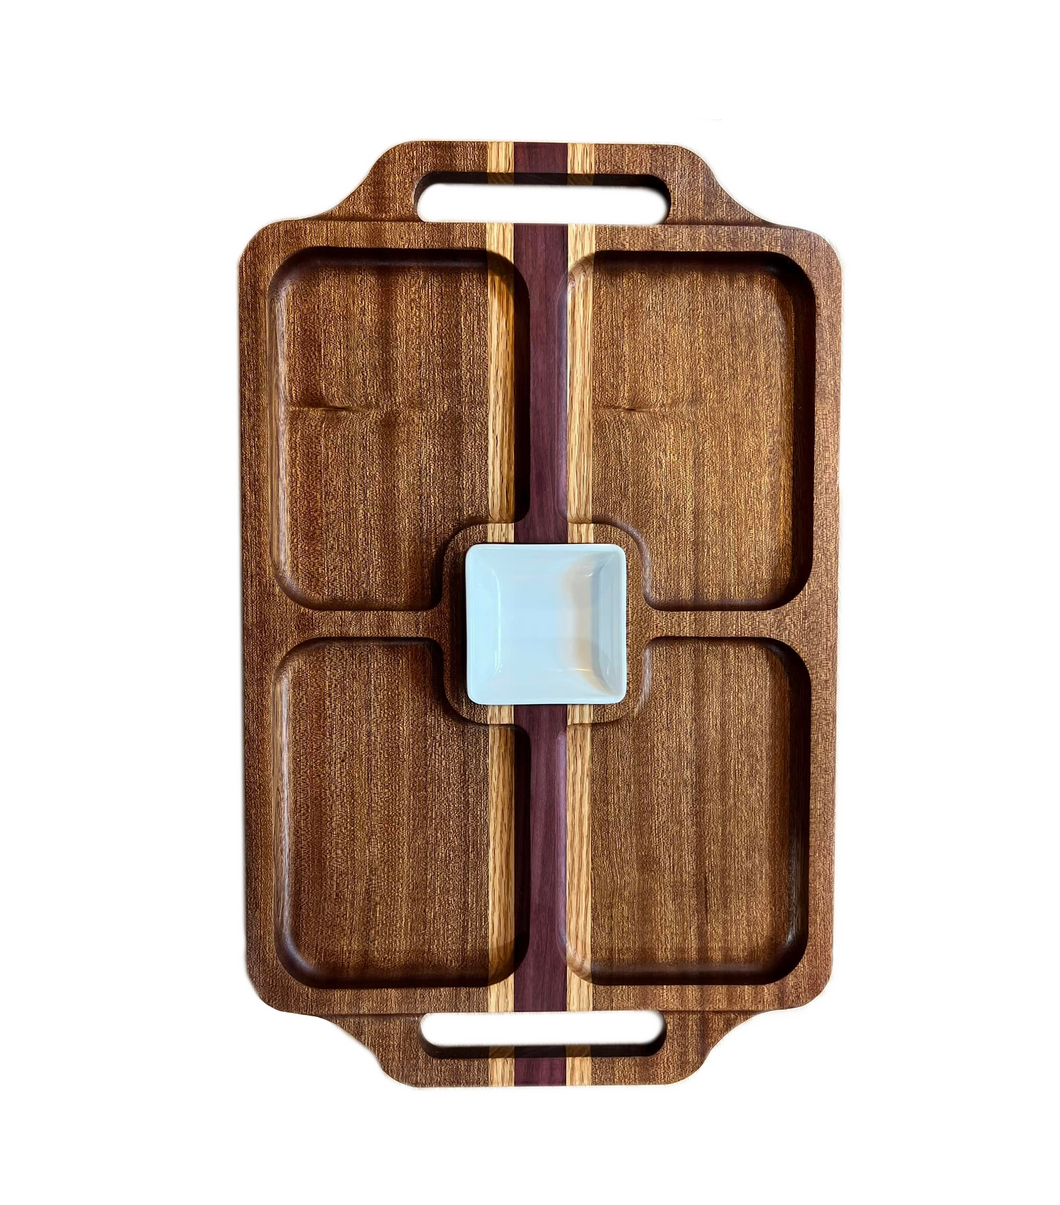 This snack tray is a perfect addition to any kitchen for easy entertaining. Its striking wood grain gives it a luxurious look that adds a touch of elegance to any occasion. Plus, it's built to last with durable construction and a classic style that won't go out of fashion. Enjoy your snacks with style! Thomas Fine Woodworks, Aaron Thomas